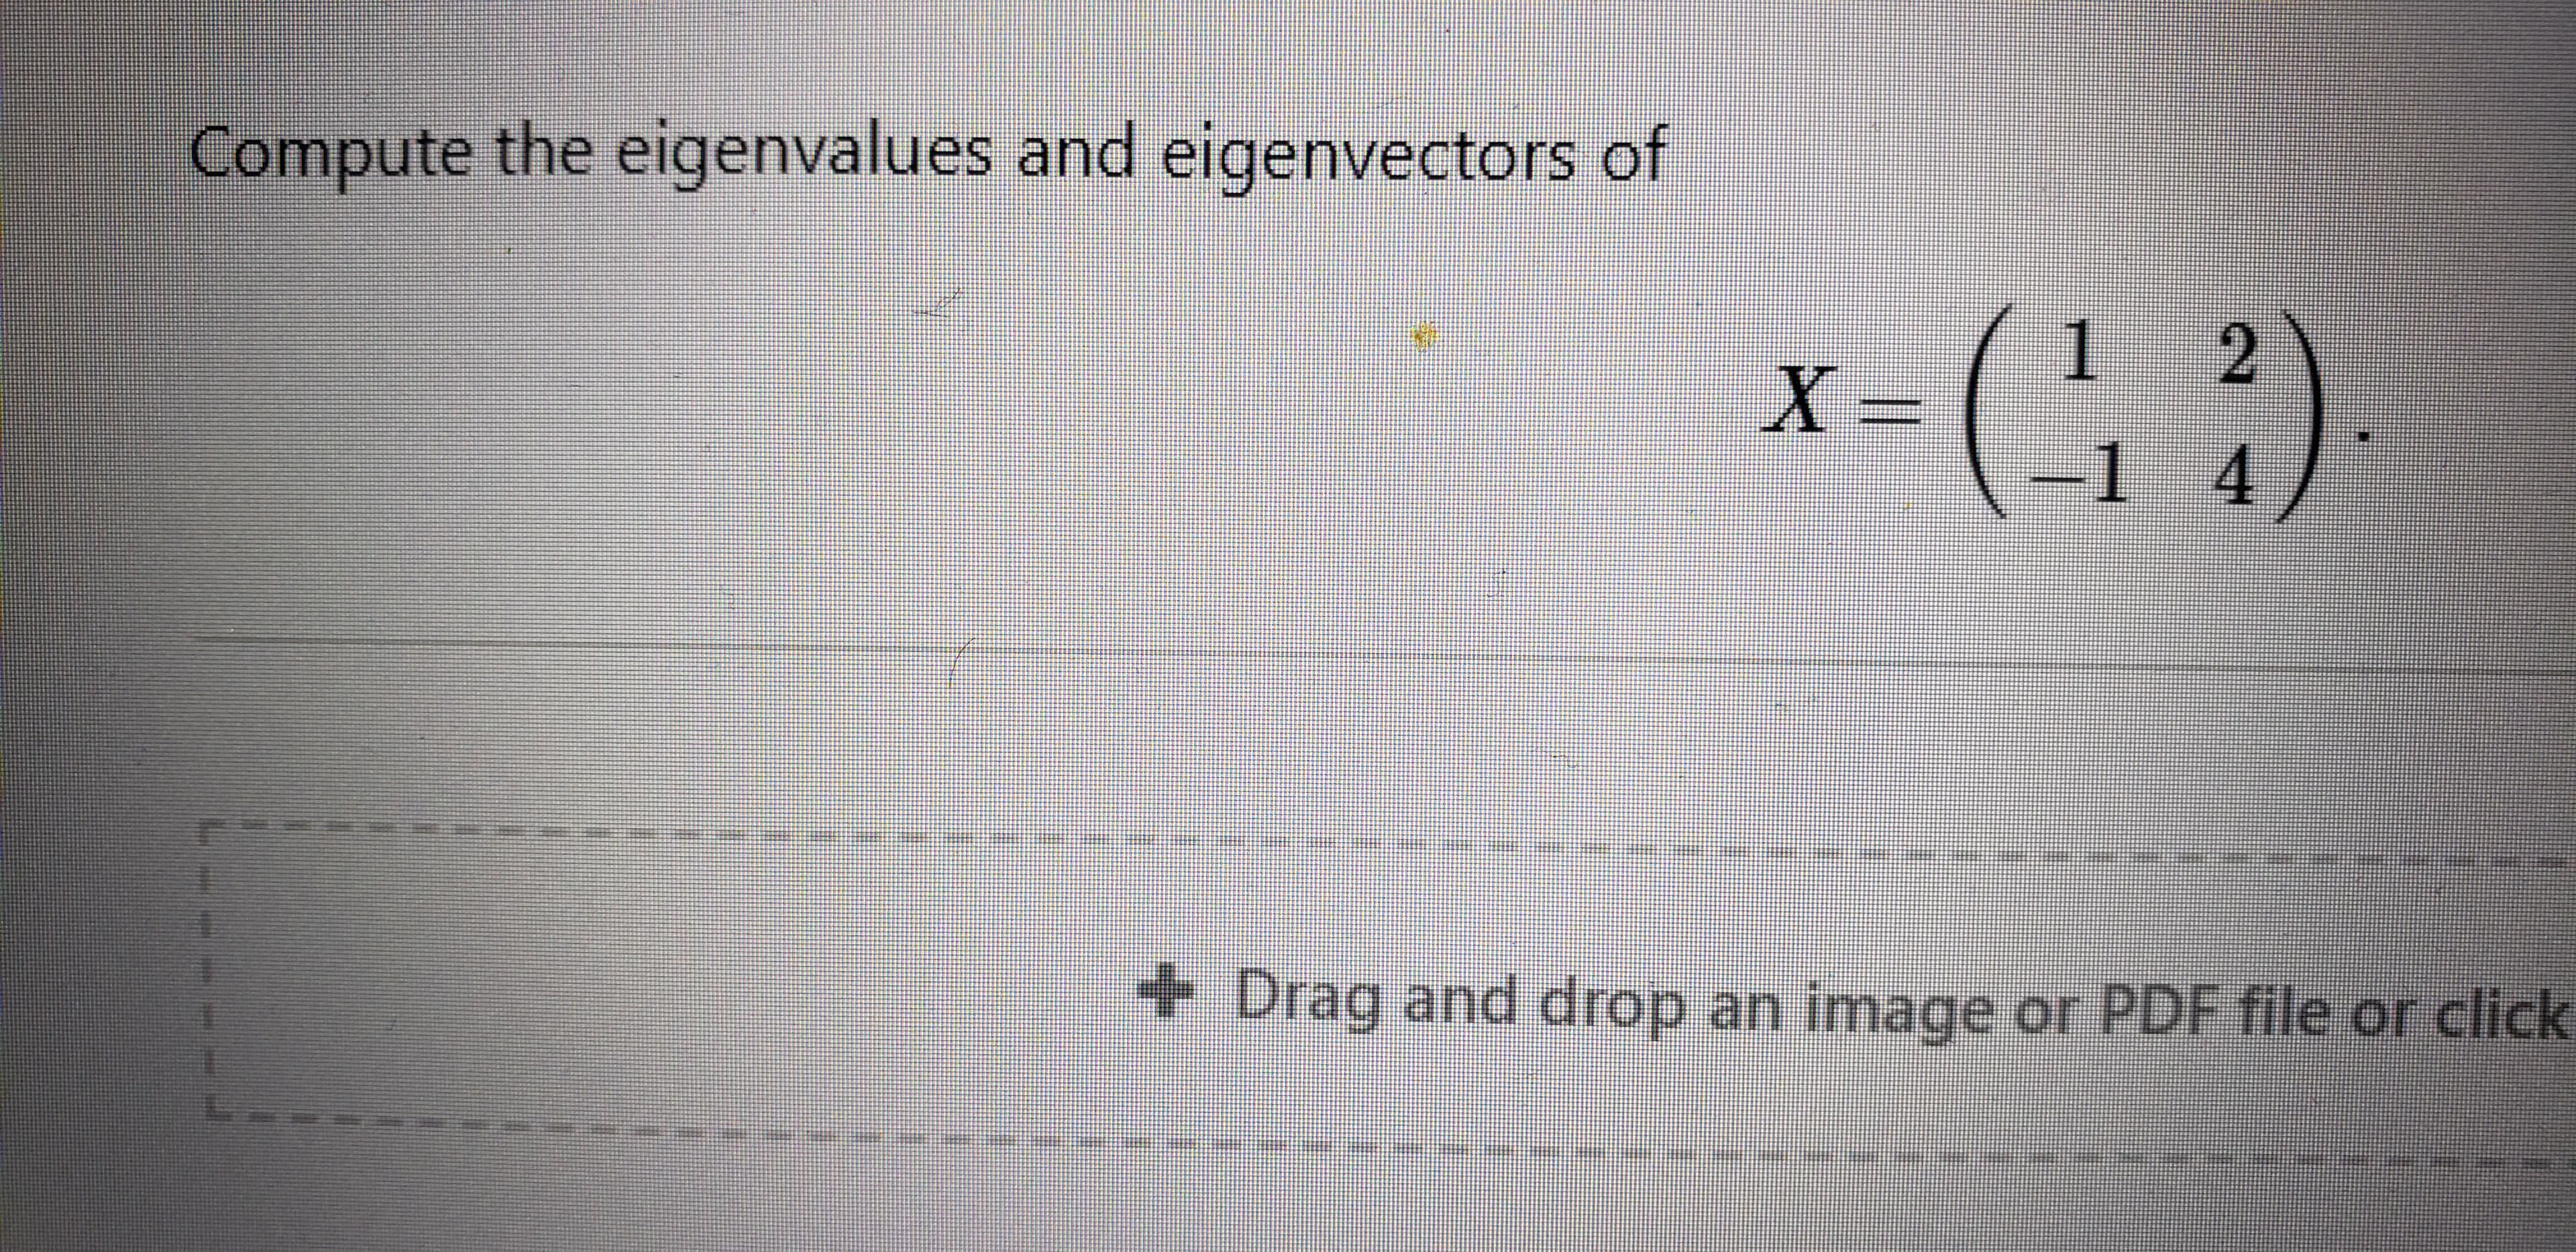 Compute th eigenvalues and eigenvectors of
eigenvectors of
Compute the eigenvalues and
1.
2.
3D=
14
+ Drag and drop an image or PDF file or click
